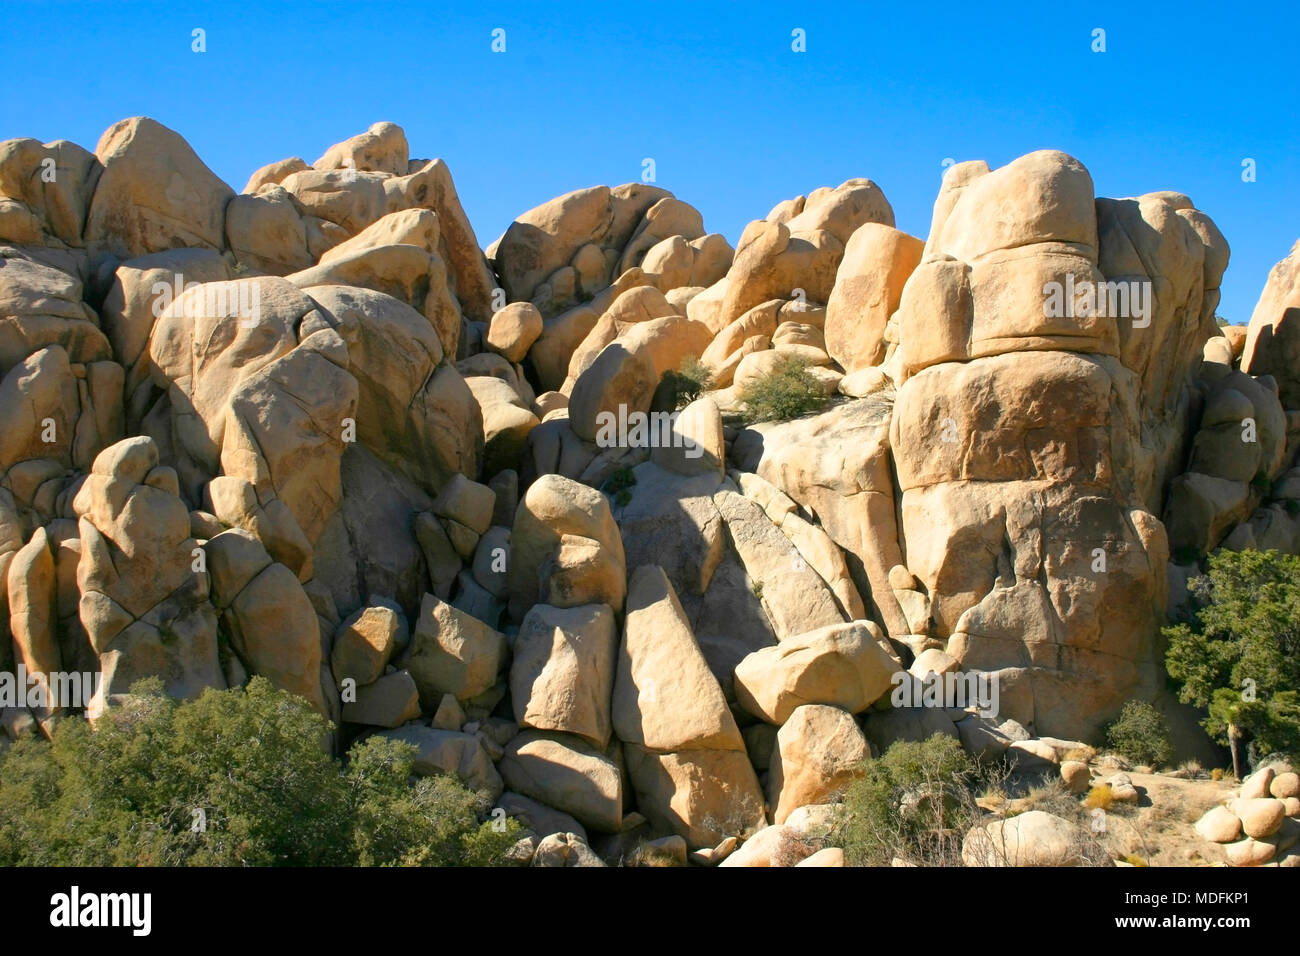 Amazing nature of the Joshua Tree National Park which is part of dry Mojave Desert in California. Lots of rocks and cacti Stock Photo